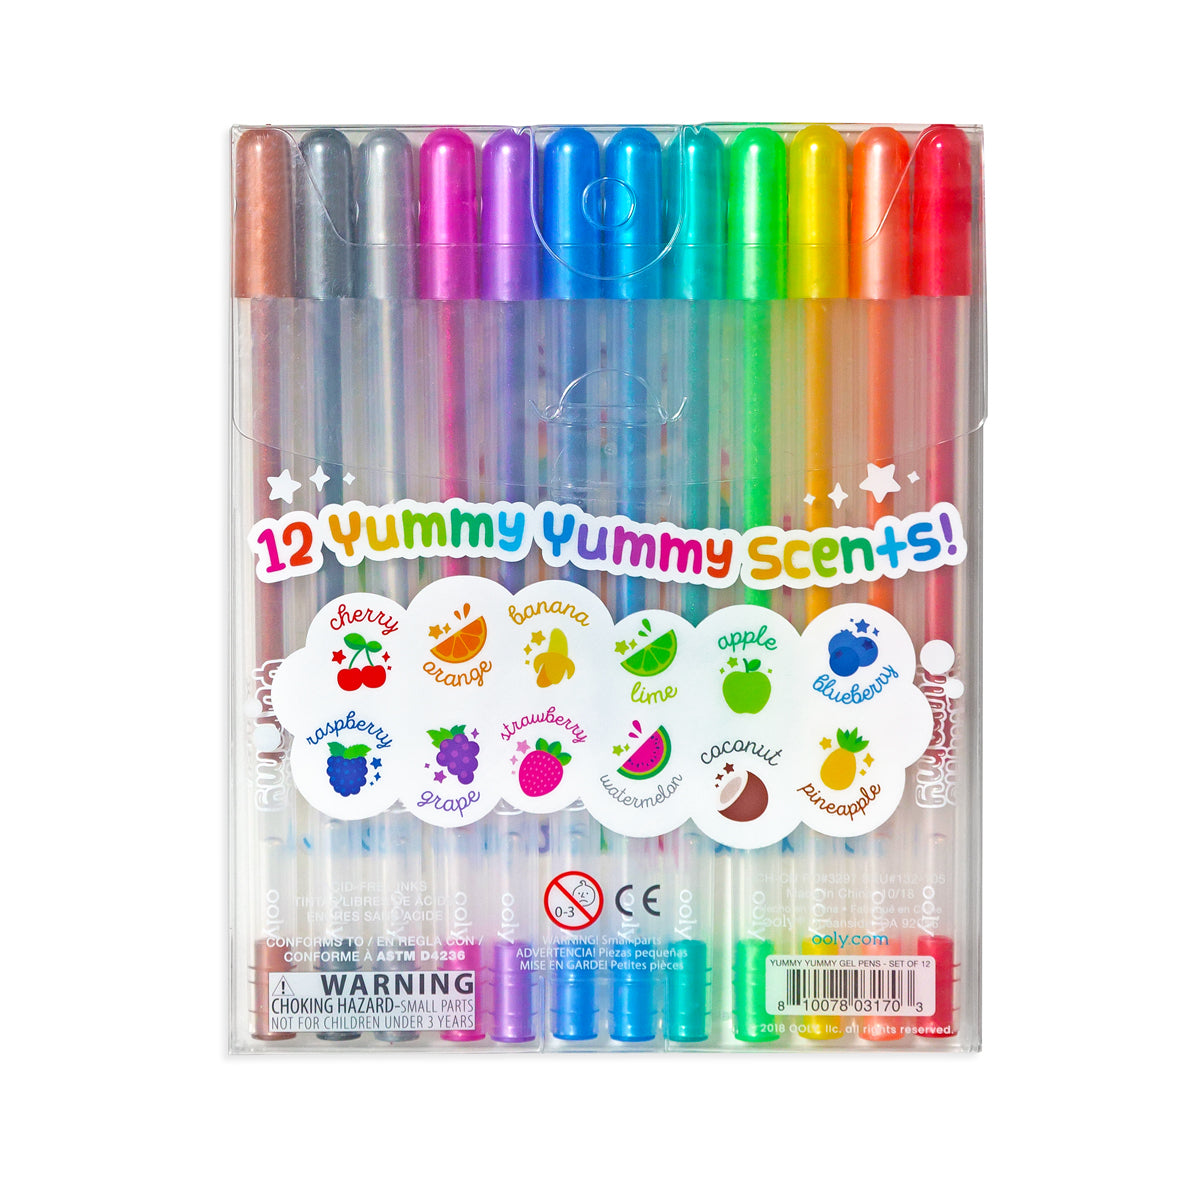 Ooly Yummy Yummy Scented Glitter Gel Pens Set of 12